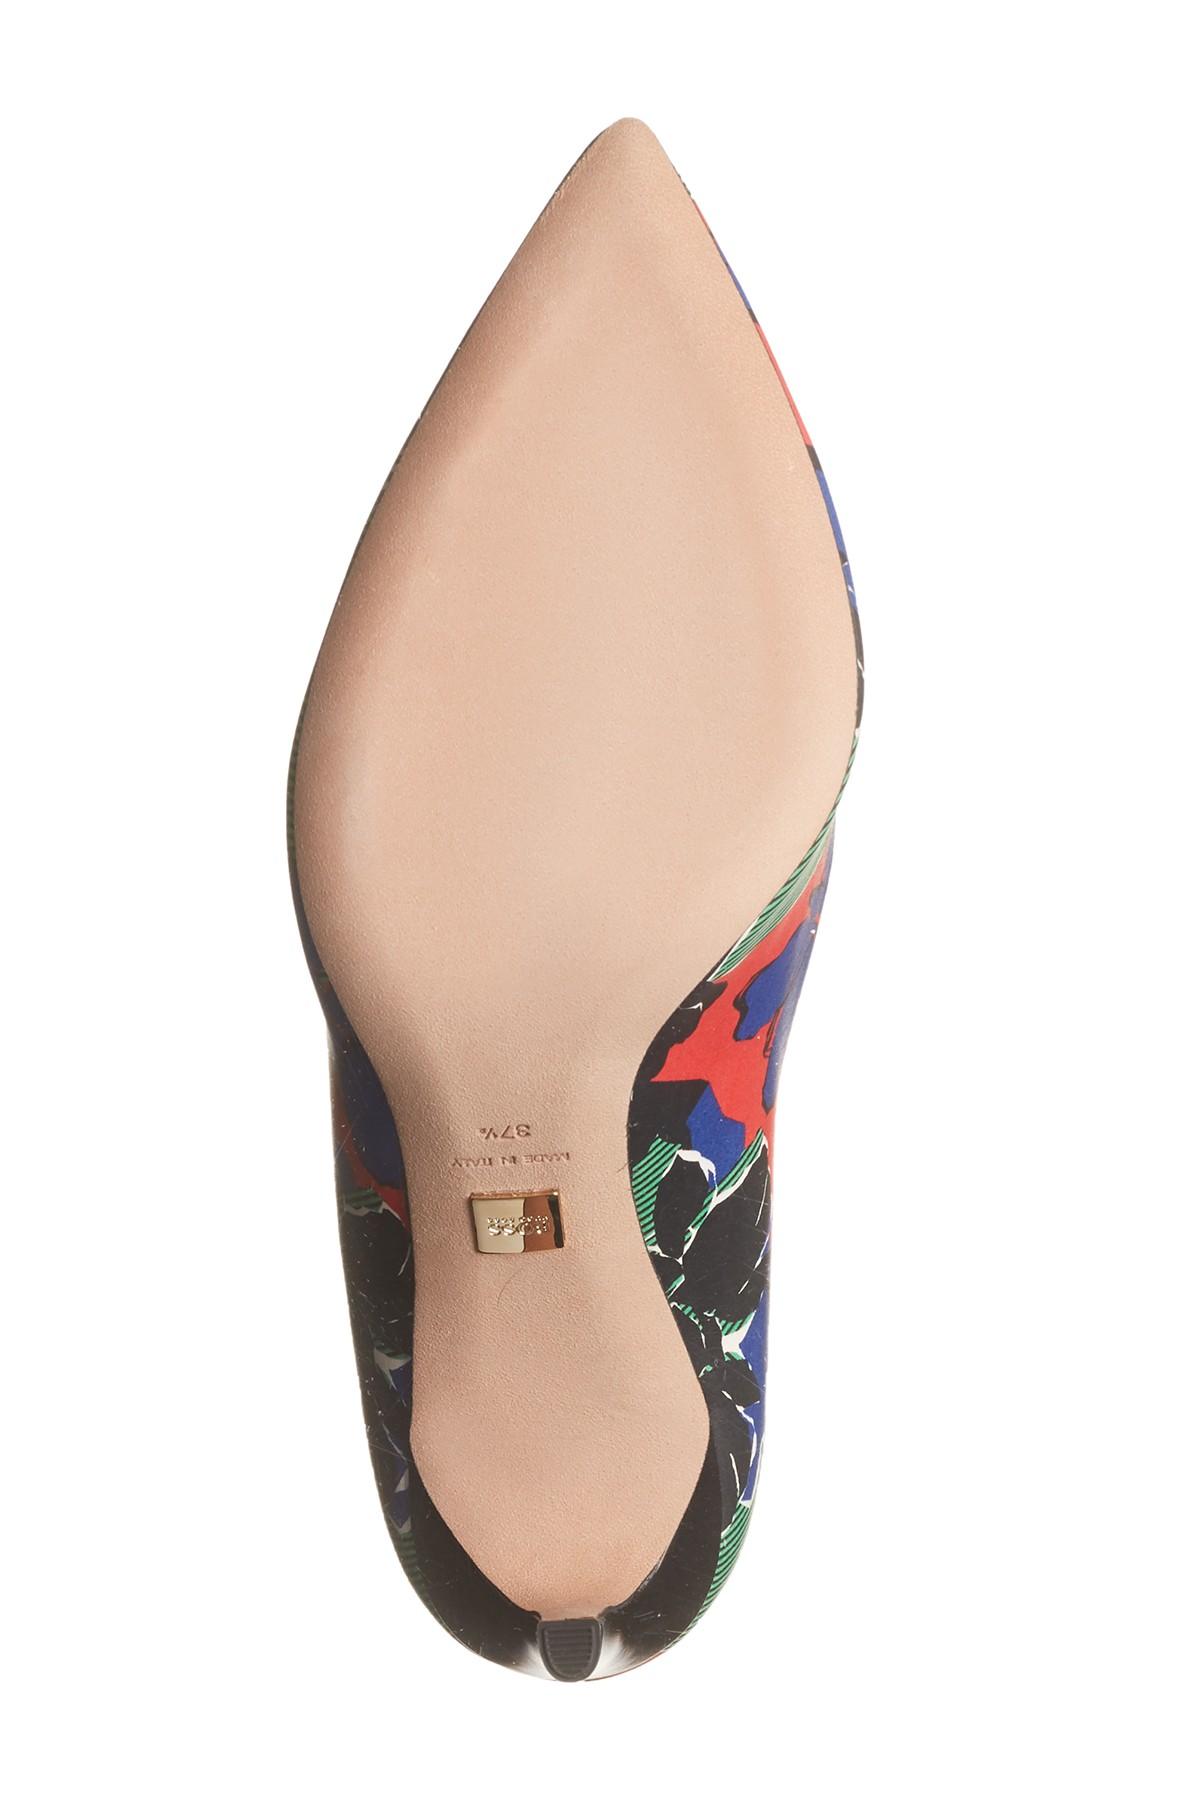 BOSS by Hugo Boss Leather Staple Floral Pump - Lyst